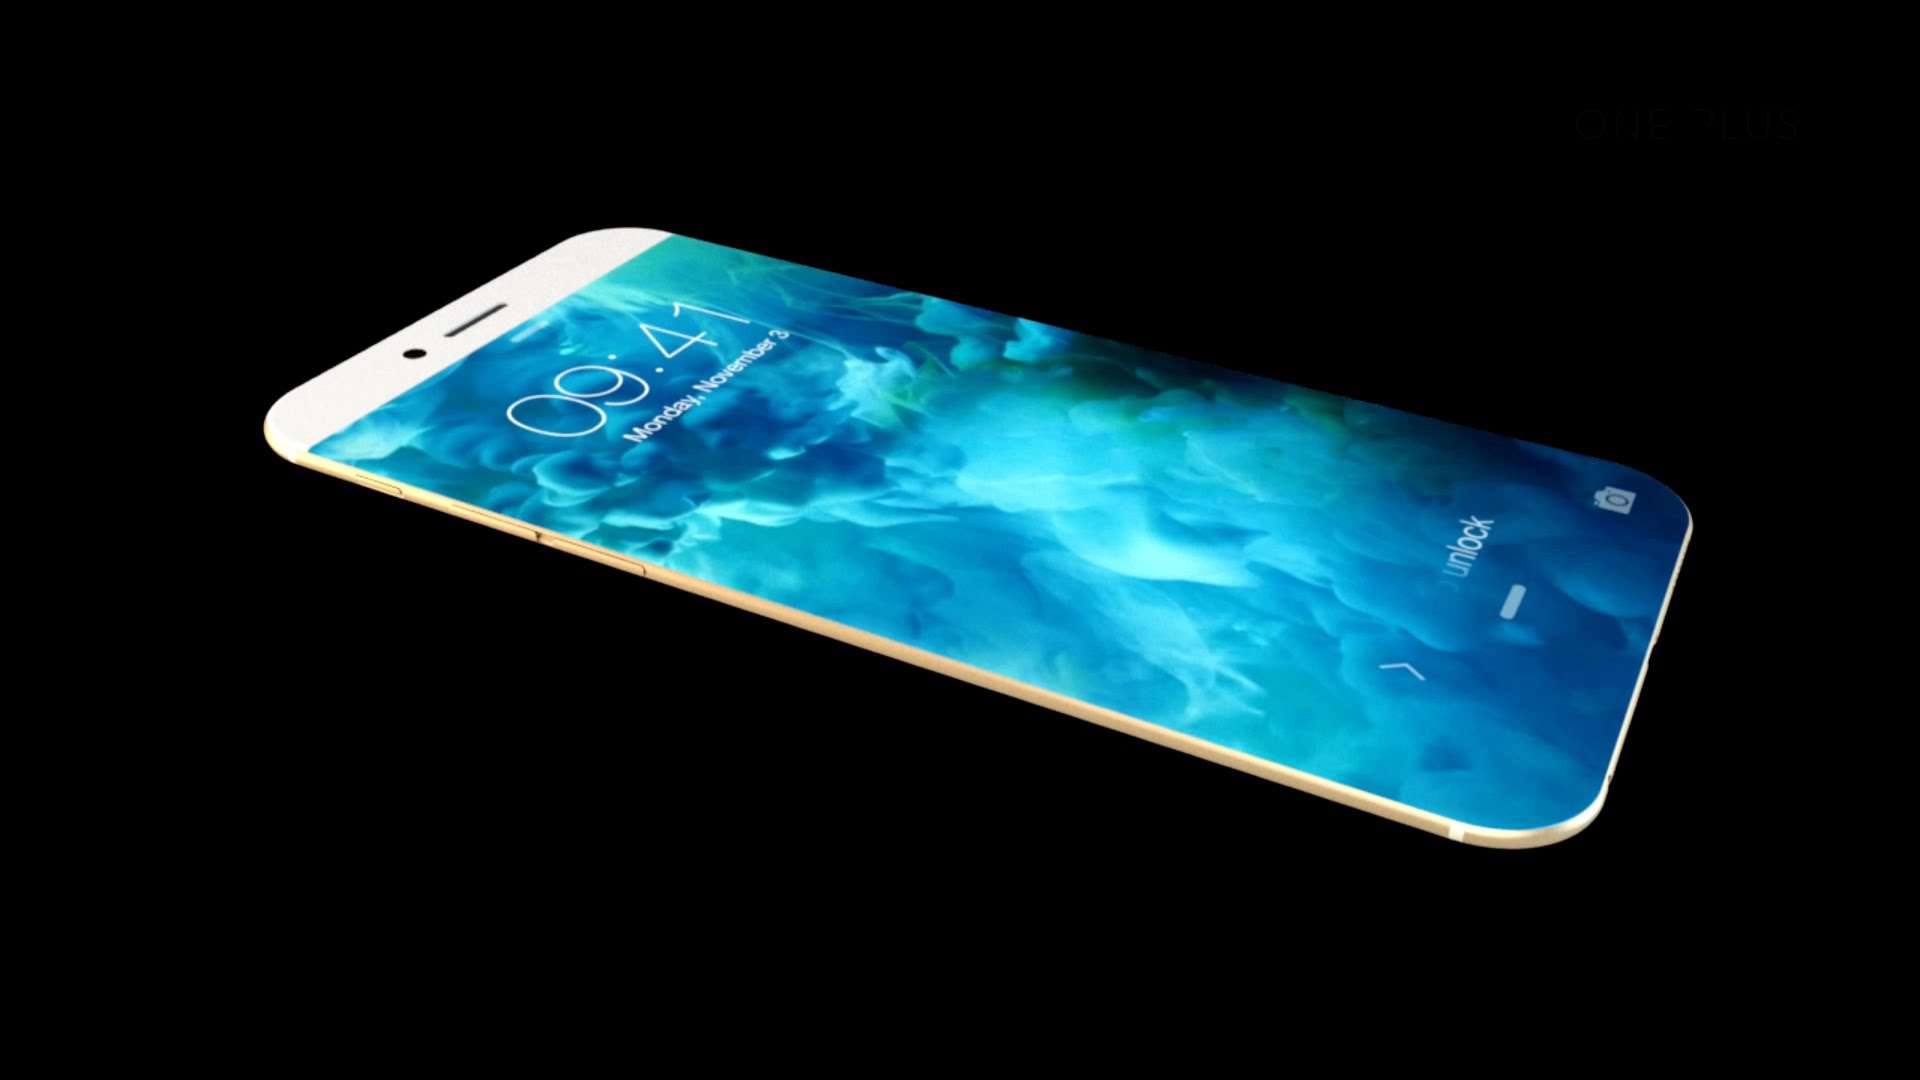 IPHONE 7: A WHOLE NEW LOOK WITHOUT A HOME BUTTON